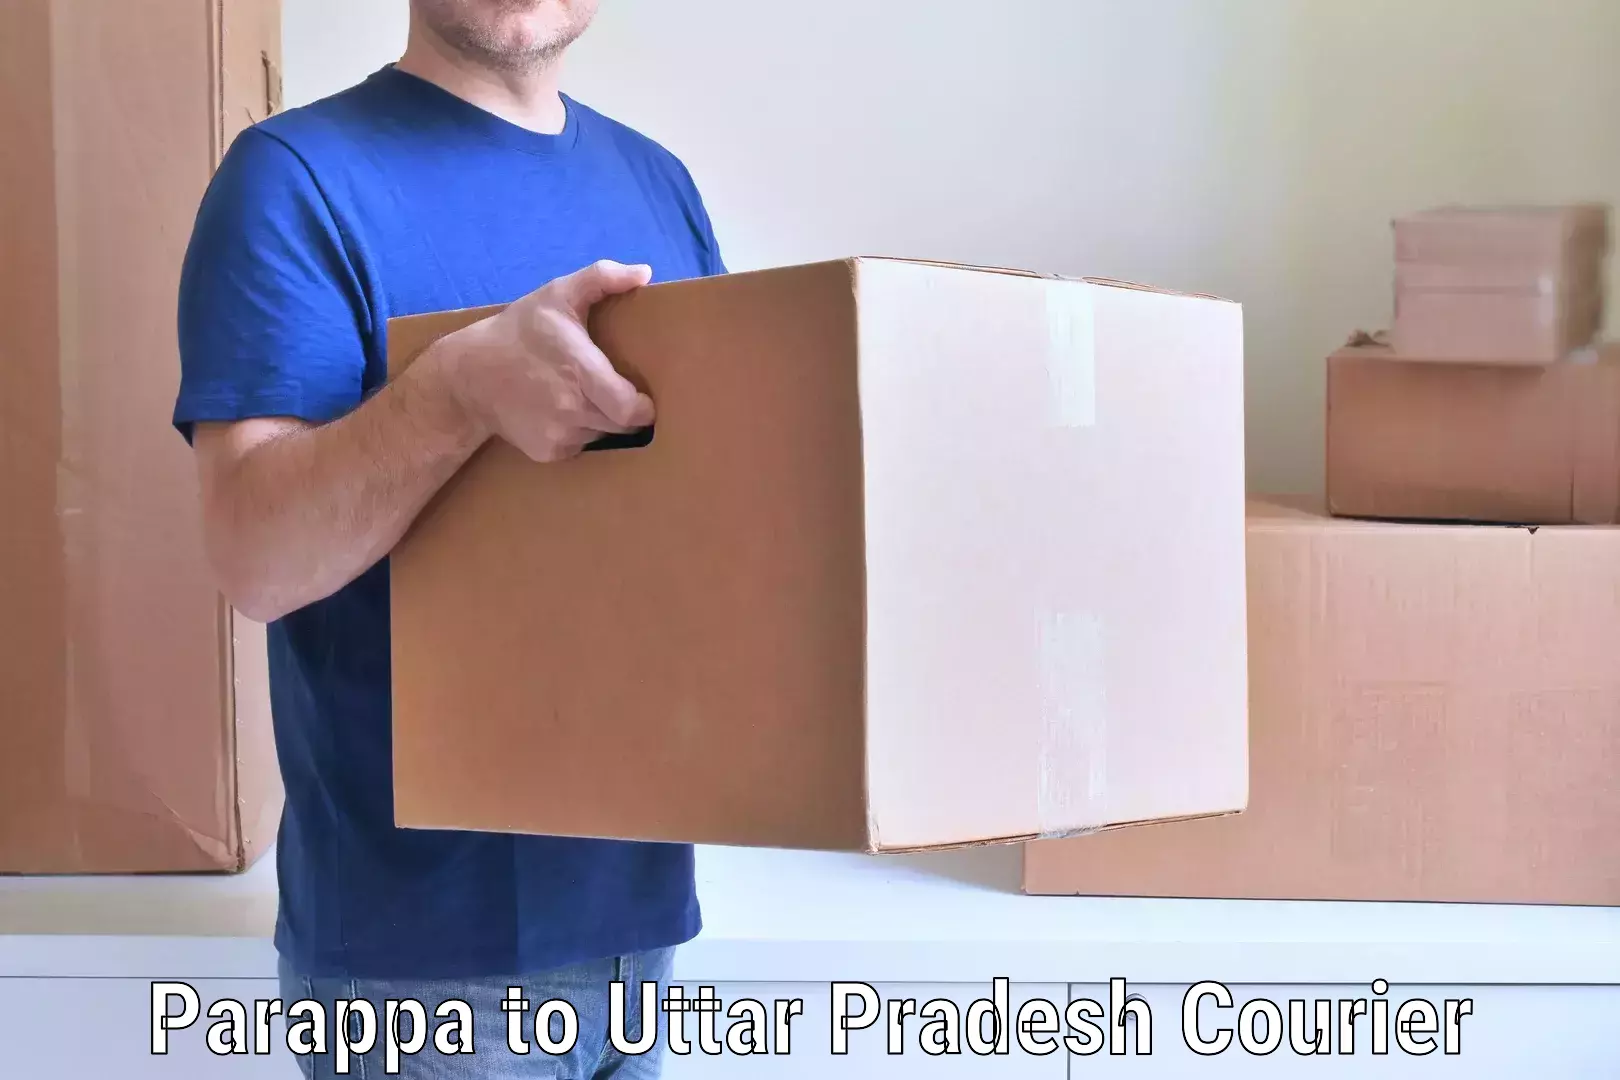 Affordable home movers Parappa to Agra